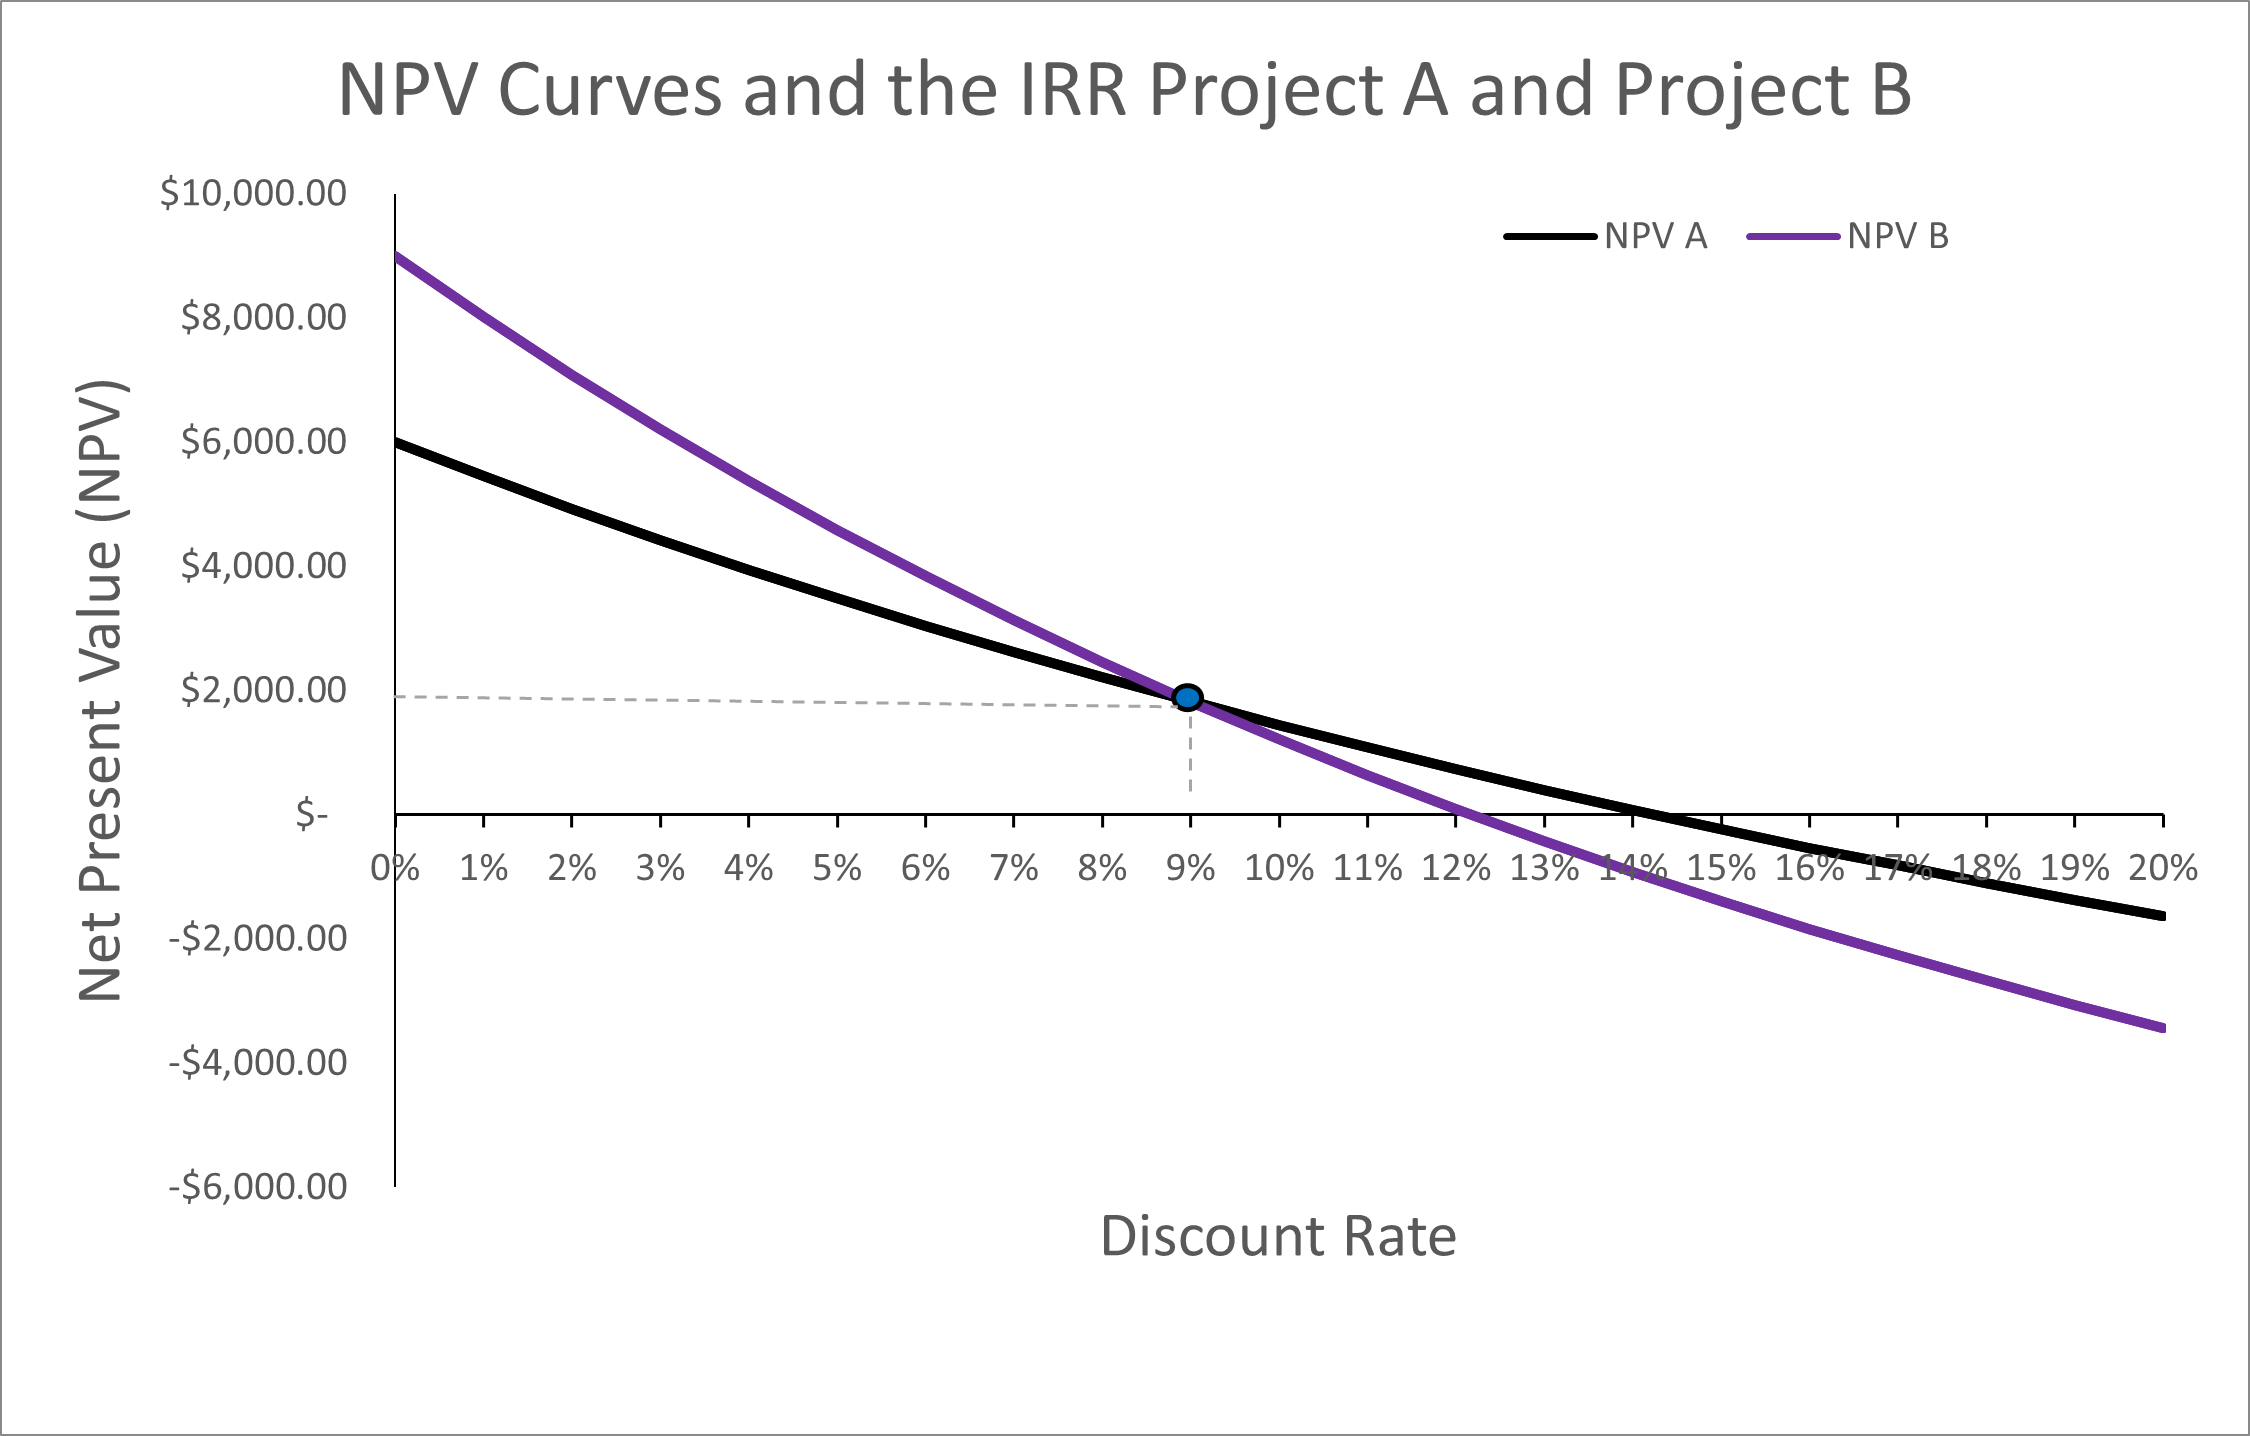 The NPV curves from Project A and Project B. The graph shows Project B intersects the x-axis at 12% and Project A intersects at 14%. These are the respective IRRs